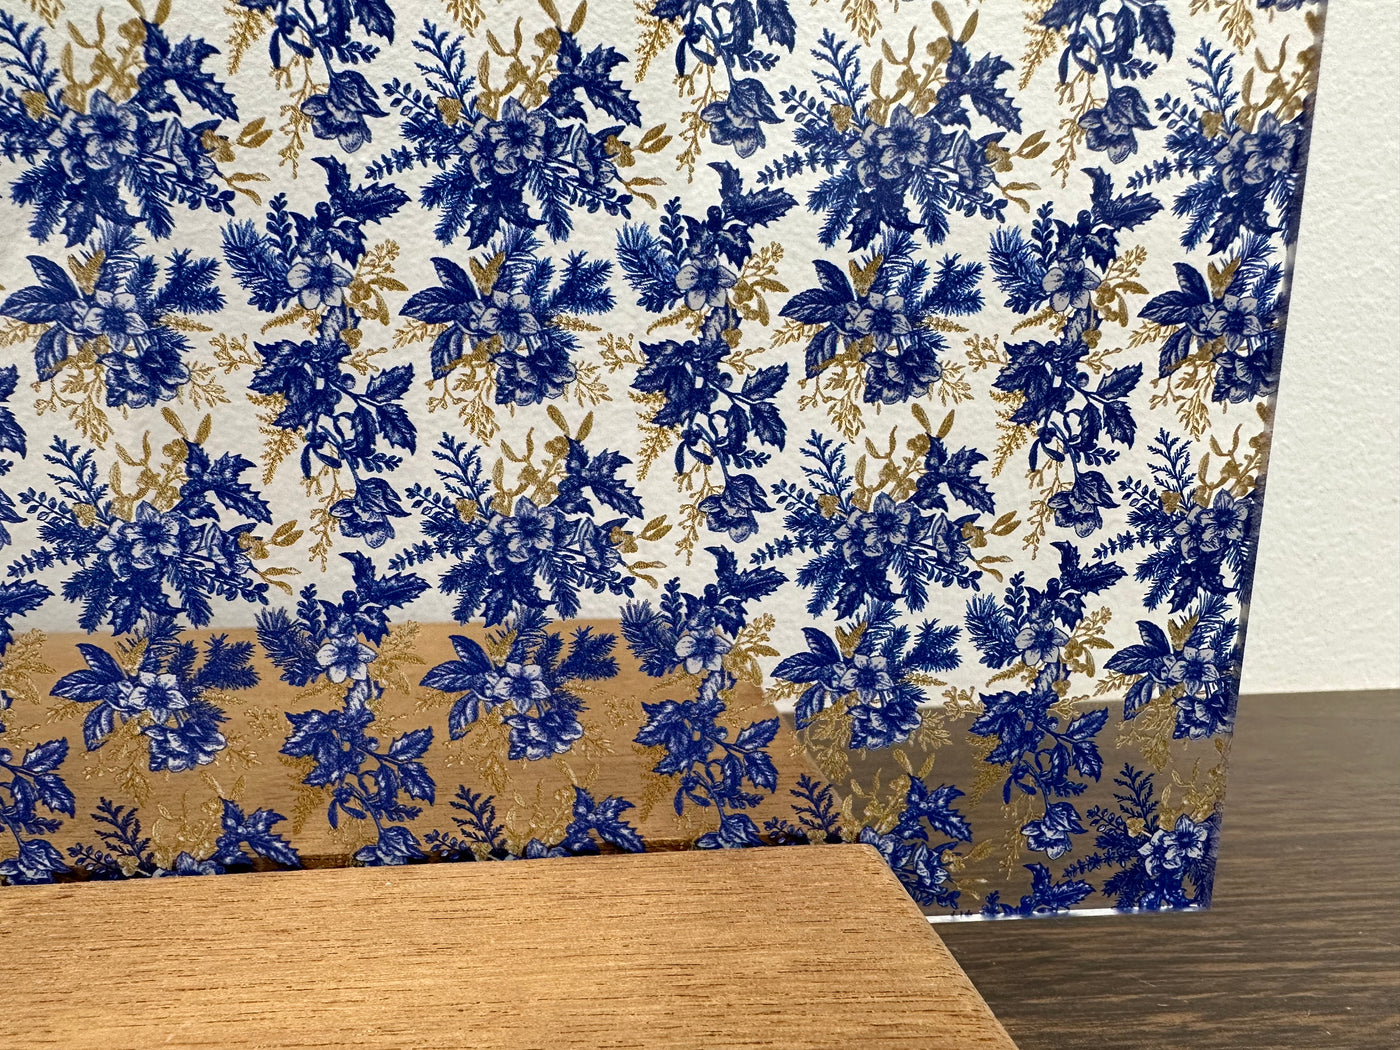 PatternPly® Scattered Blue, White, and Tan Vintage Christmas Floral